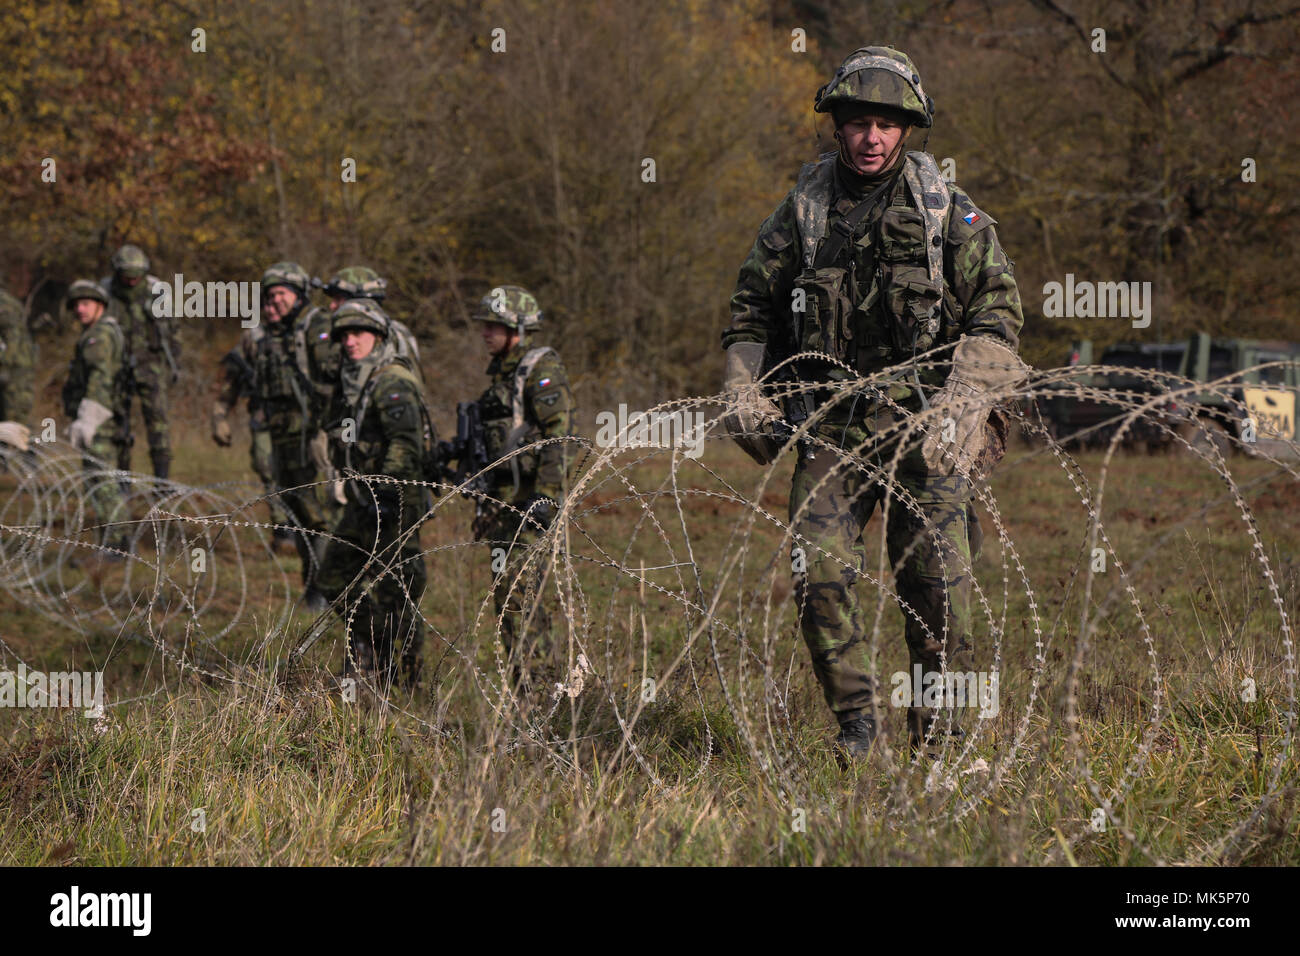 Czech Republic soldiers emplace obstacles during exercise Allied Spirit VII at the U.S. Army’s Joint Multinational Readiness Center in Hohenfels, Germany, Nov. 7, 2017. Approximately 4,050 service members from 13 nations are participating in exercise Allied Spirit VII at 7th Army Training Command’s Hohenfels Training Area, Germany, Oct. 30 to Nov. 22, 2017. Allied Spirit is a U.S. Army Europe-directed, 7ATC-conducted multinational exercise series designed to develop and enhance NATO and key partner’s interoperability and readiness. (U.S. Army photo by Spc. Jacquelynn Roberts) Stock Photo